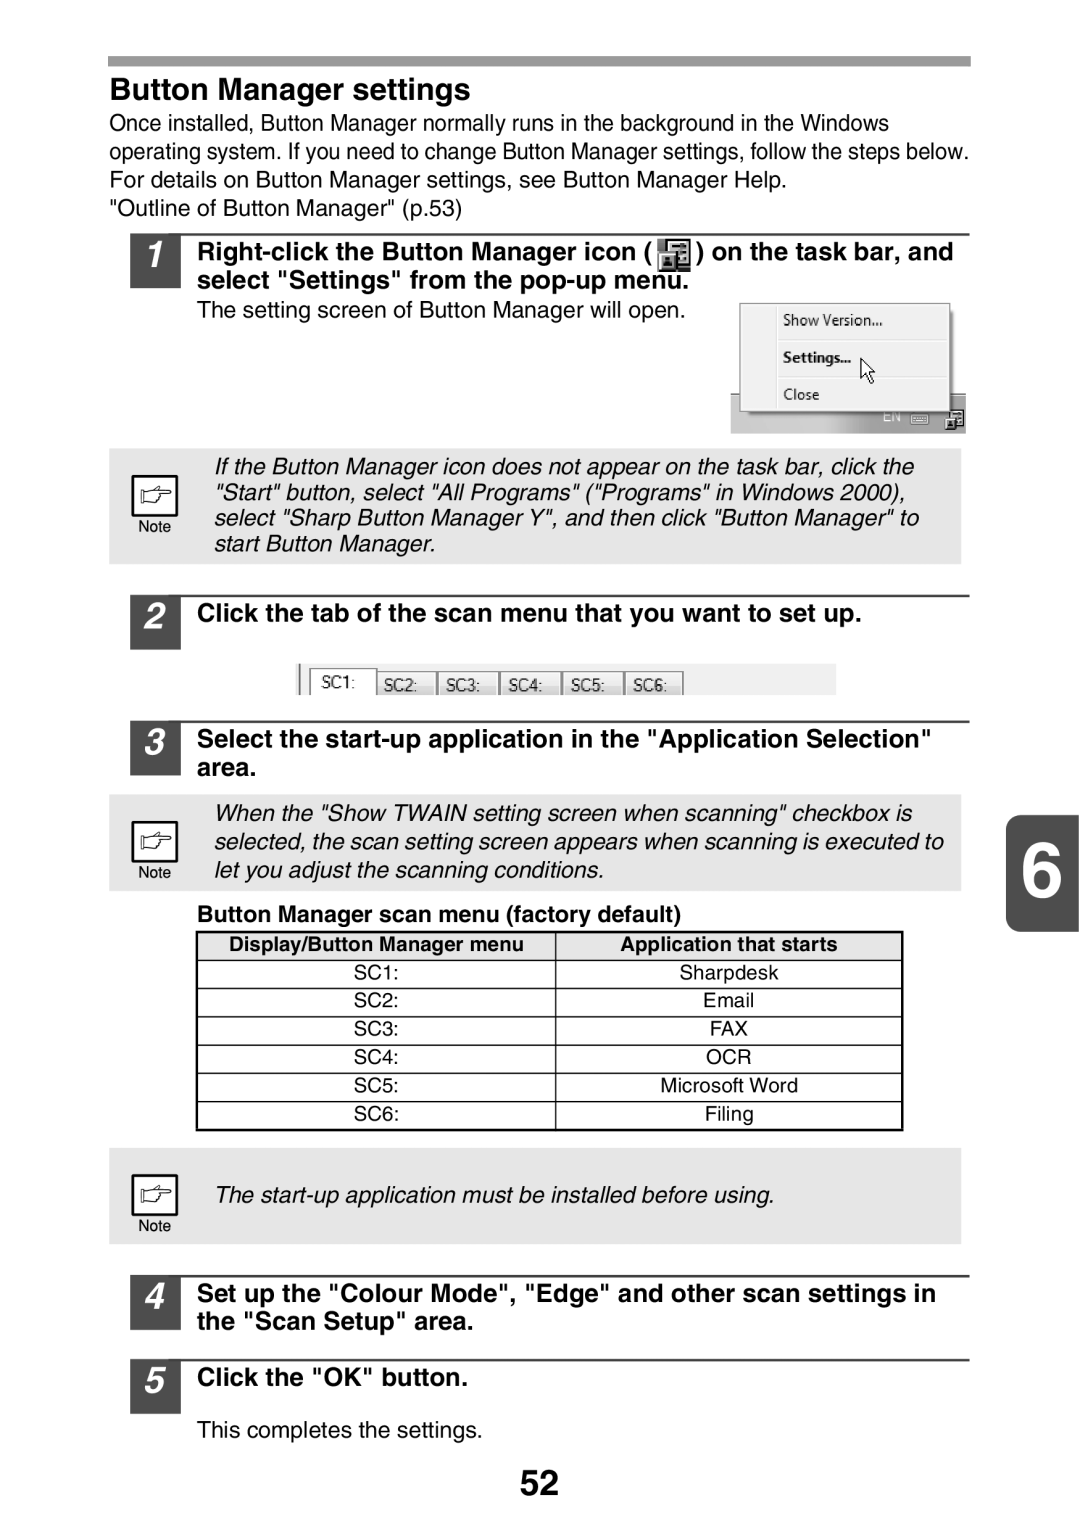 Sharp MX-B200 manual Button Manager settings, Click the tab of the scan menu that you want to set up, Click the OK button 